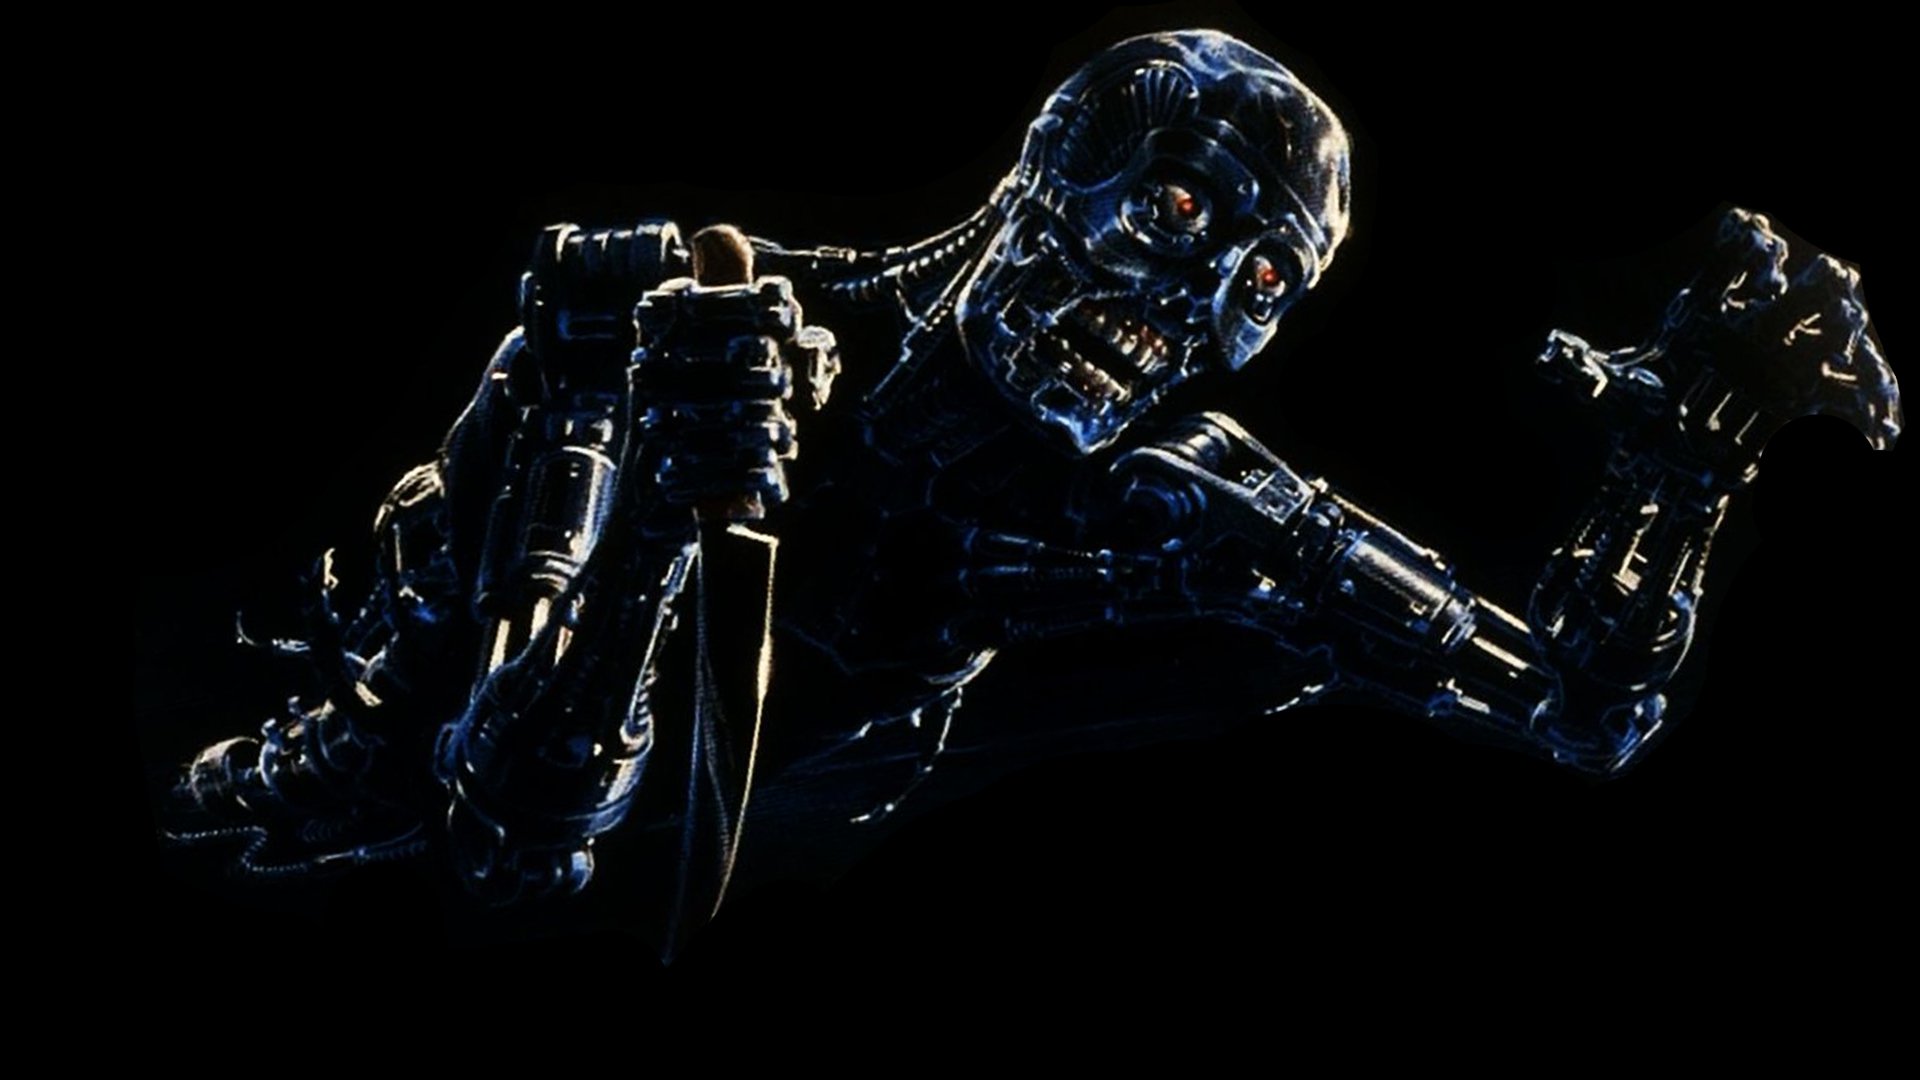 The Terminator Wallpapers Pictures Images HD Wallpapers Download Free Map Images Wallpaper [wallpaper684.blogspot.com]